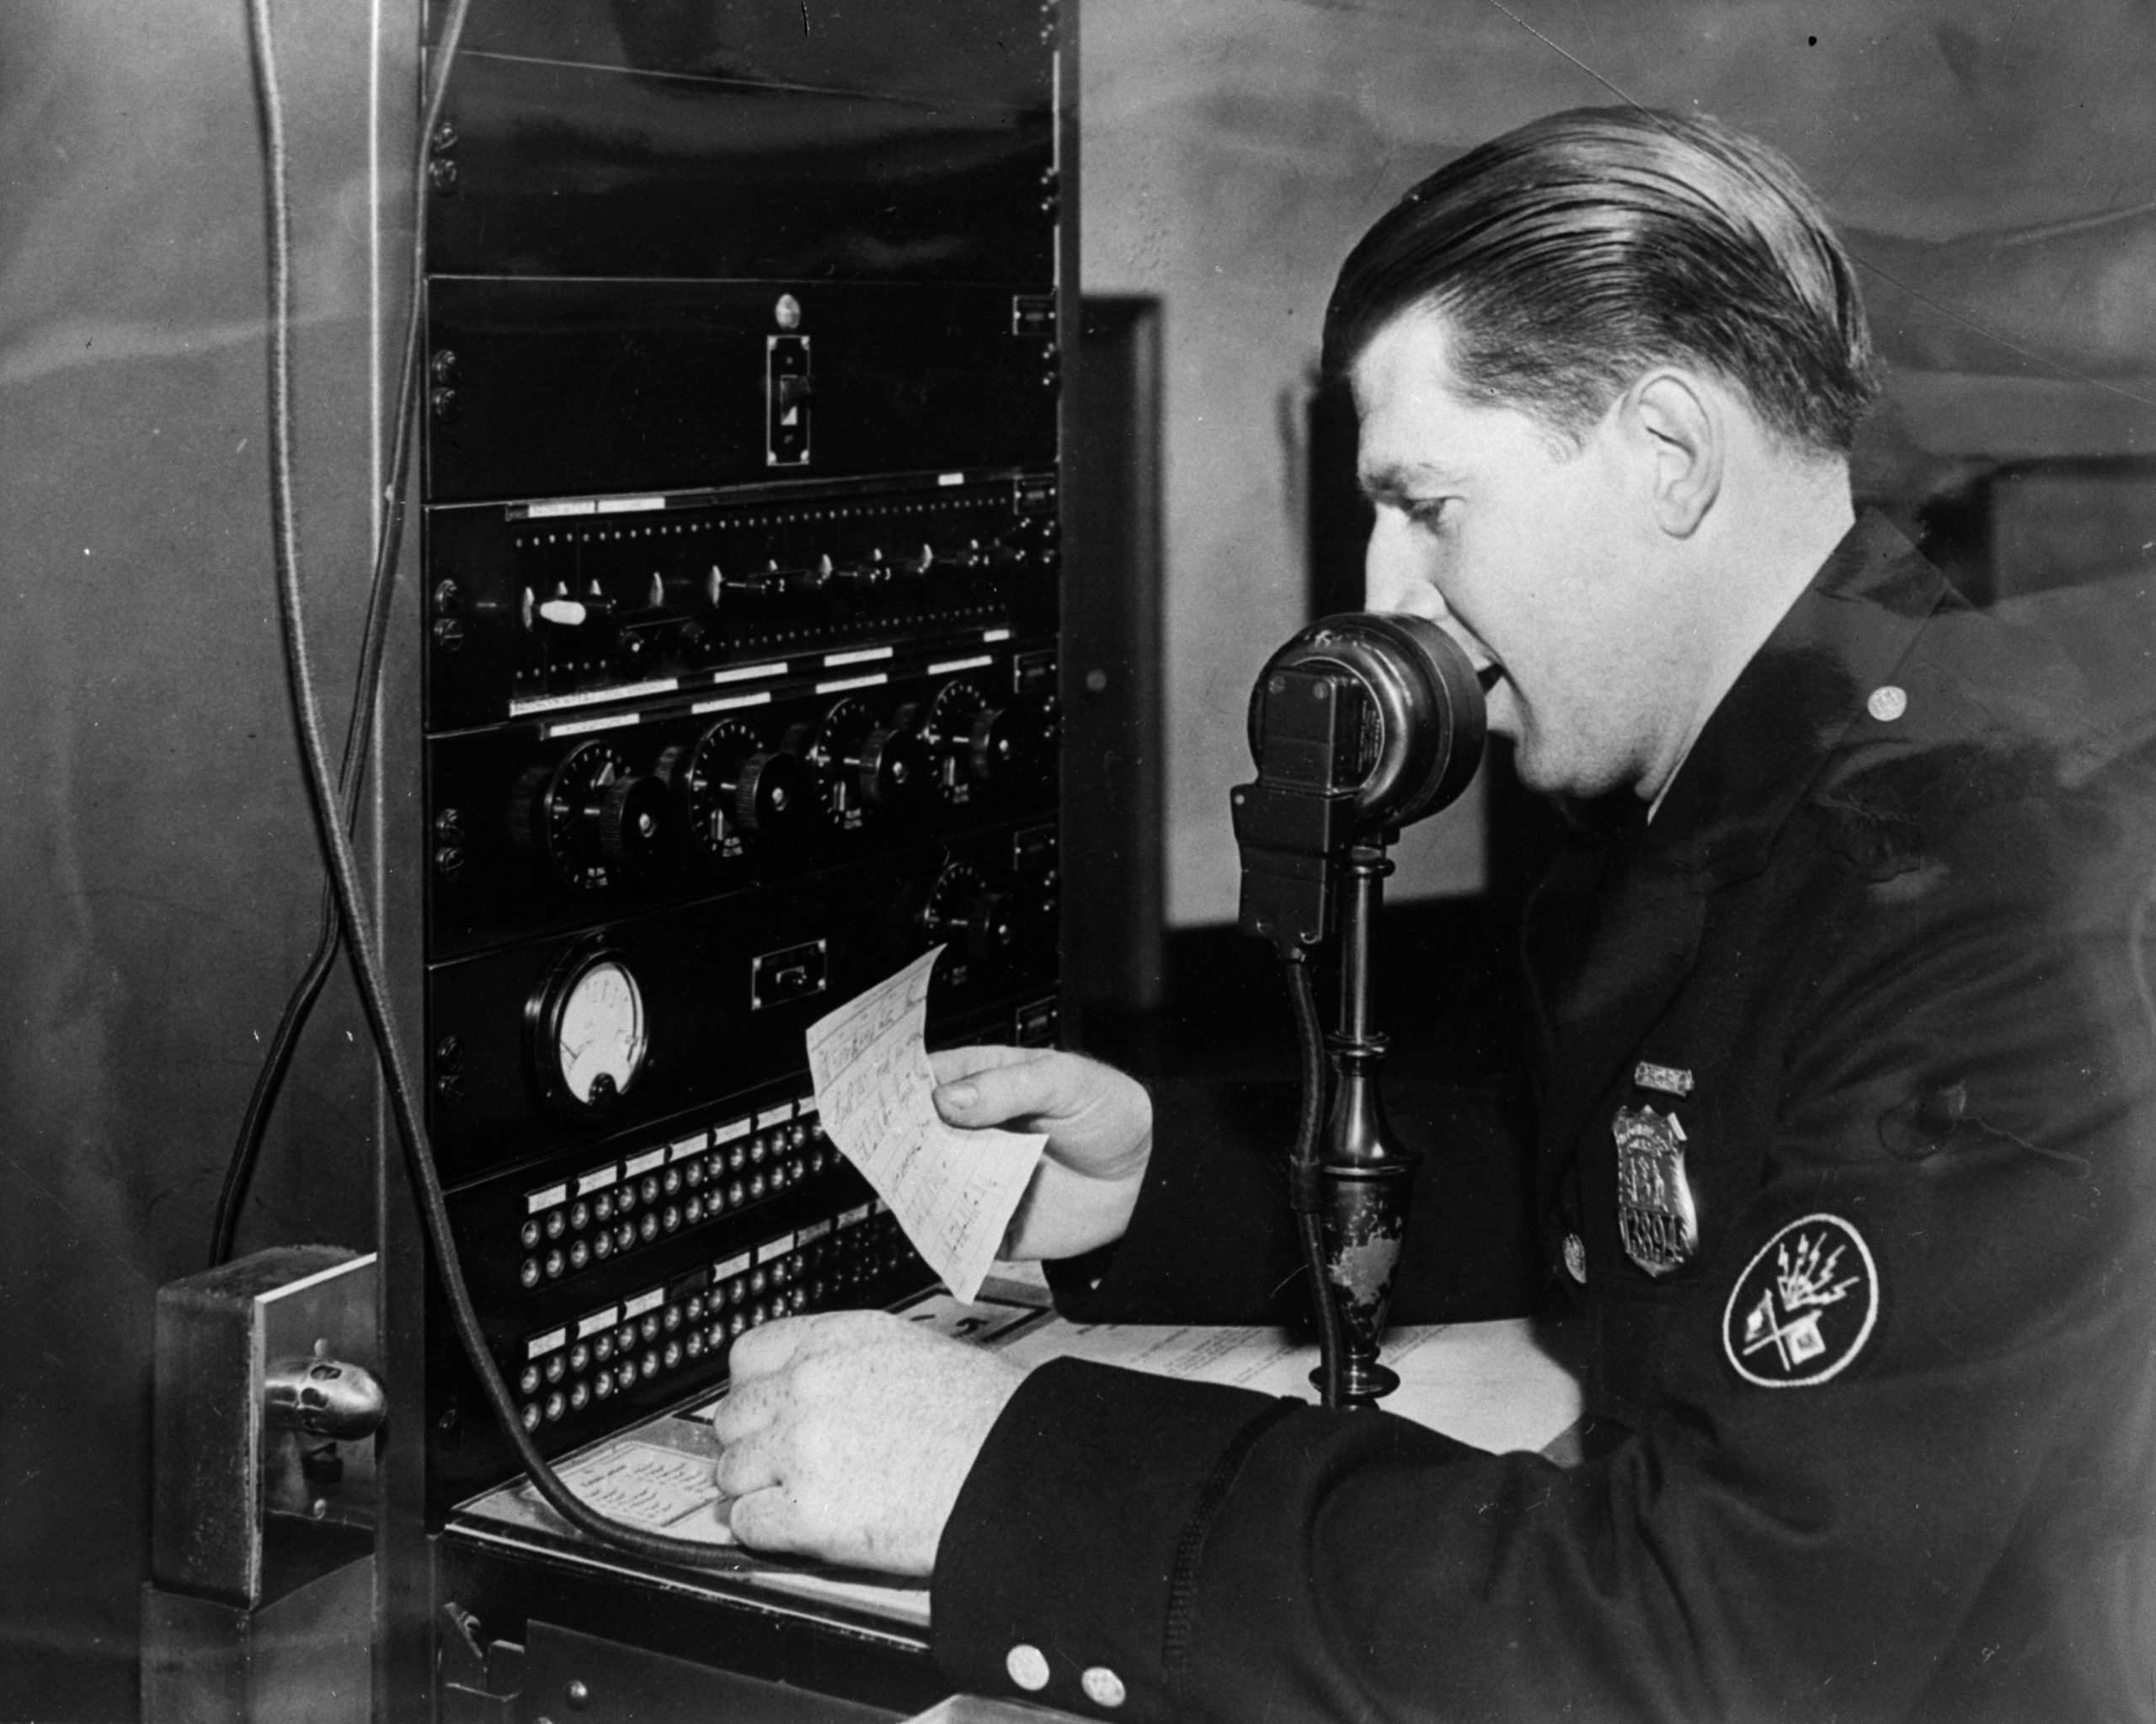 circa 1930: A member of the New York Metropolitan police using a radio-telephone link for communicating with the city's police radio cars. (Photo: General Photographic Agency/Getty Images)